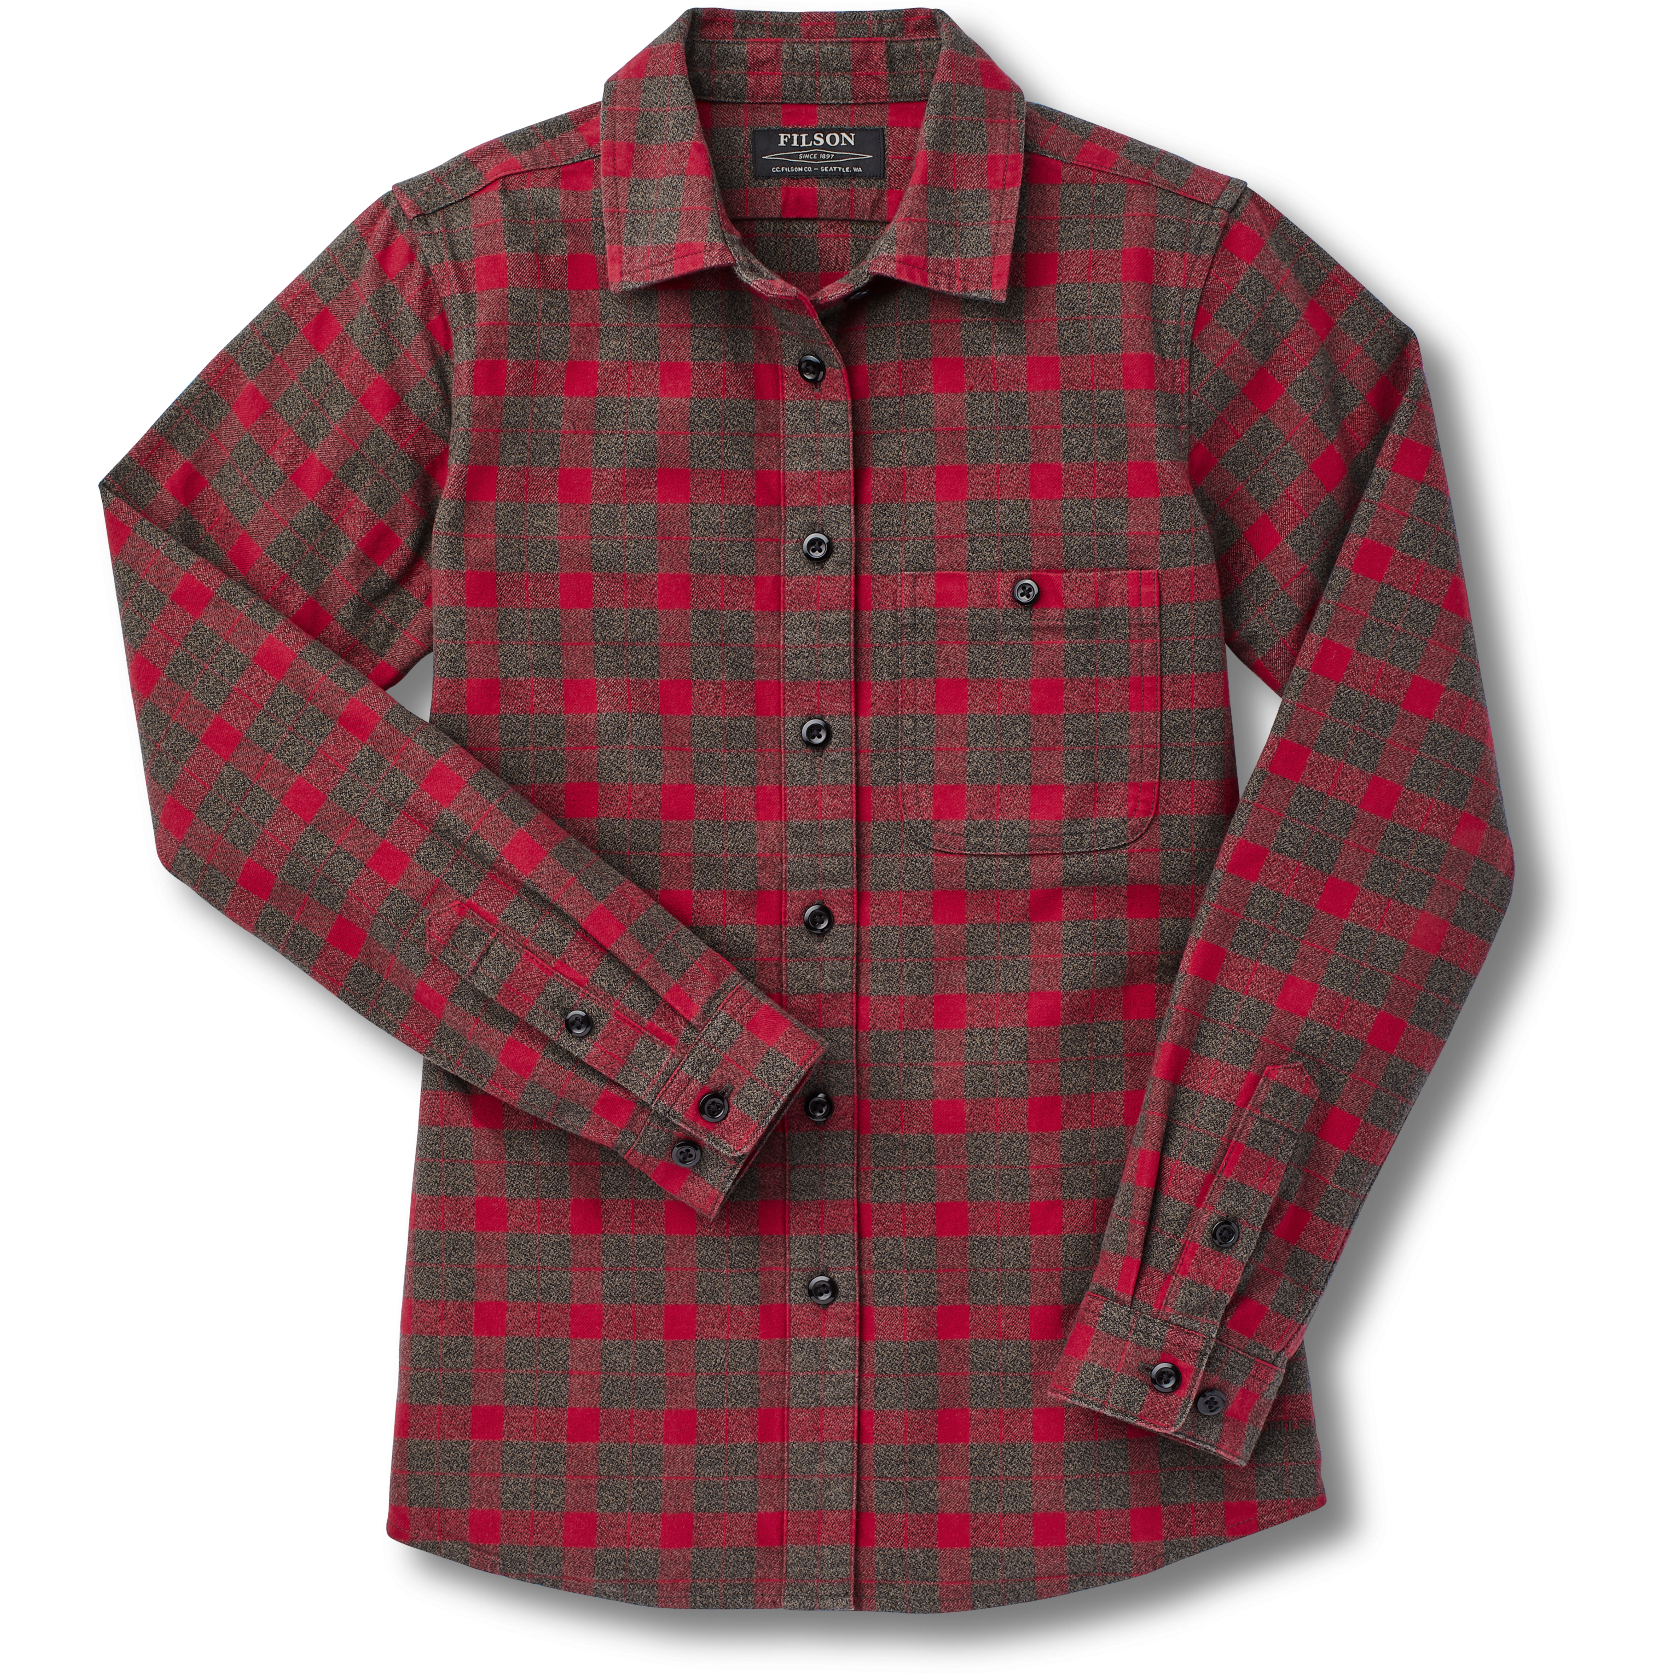 Women's Alaskan Guide Shirt Heather Taupe/Red Plaid